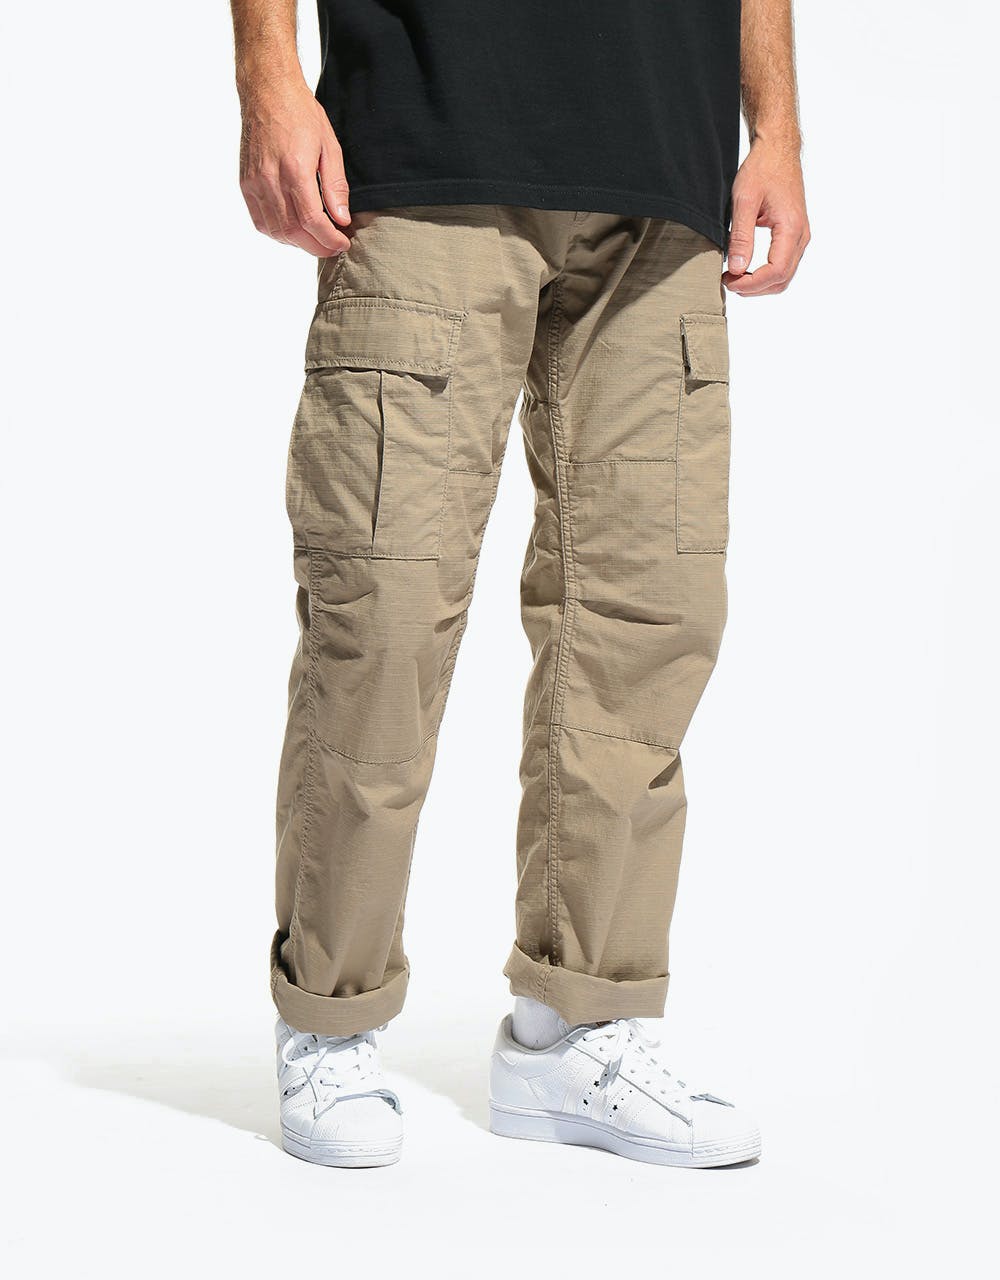 Carhartt WIP Aviation Pant - Leather (Rinsed)